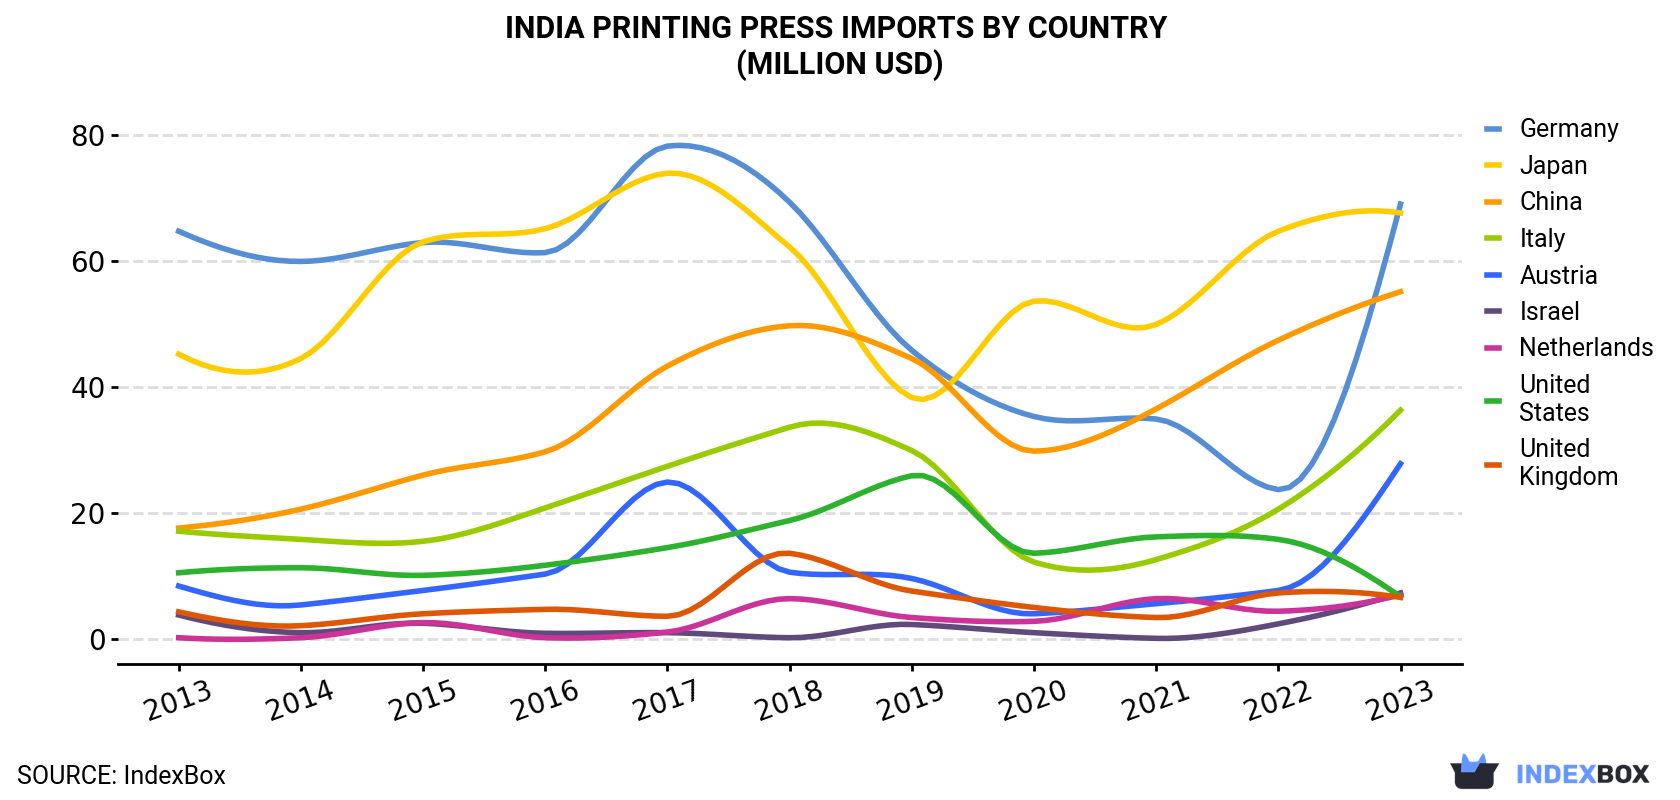 India Printing Press Imports By Country (Million USD)